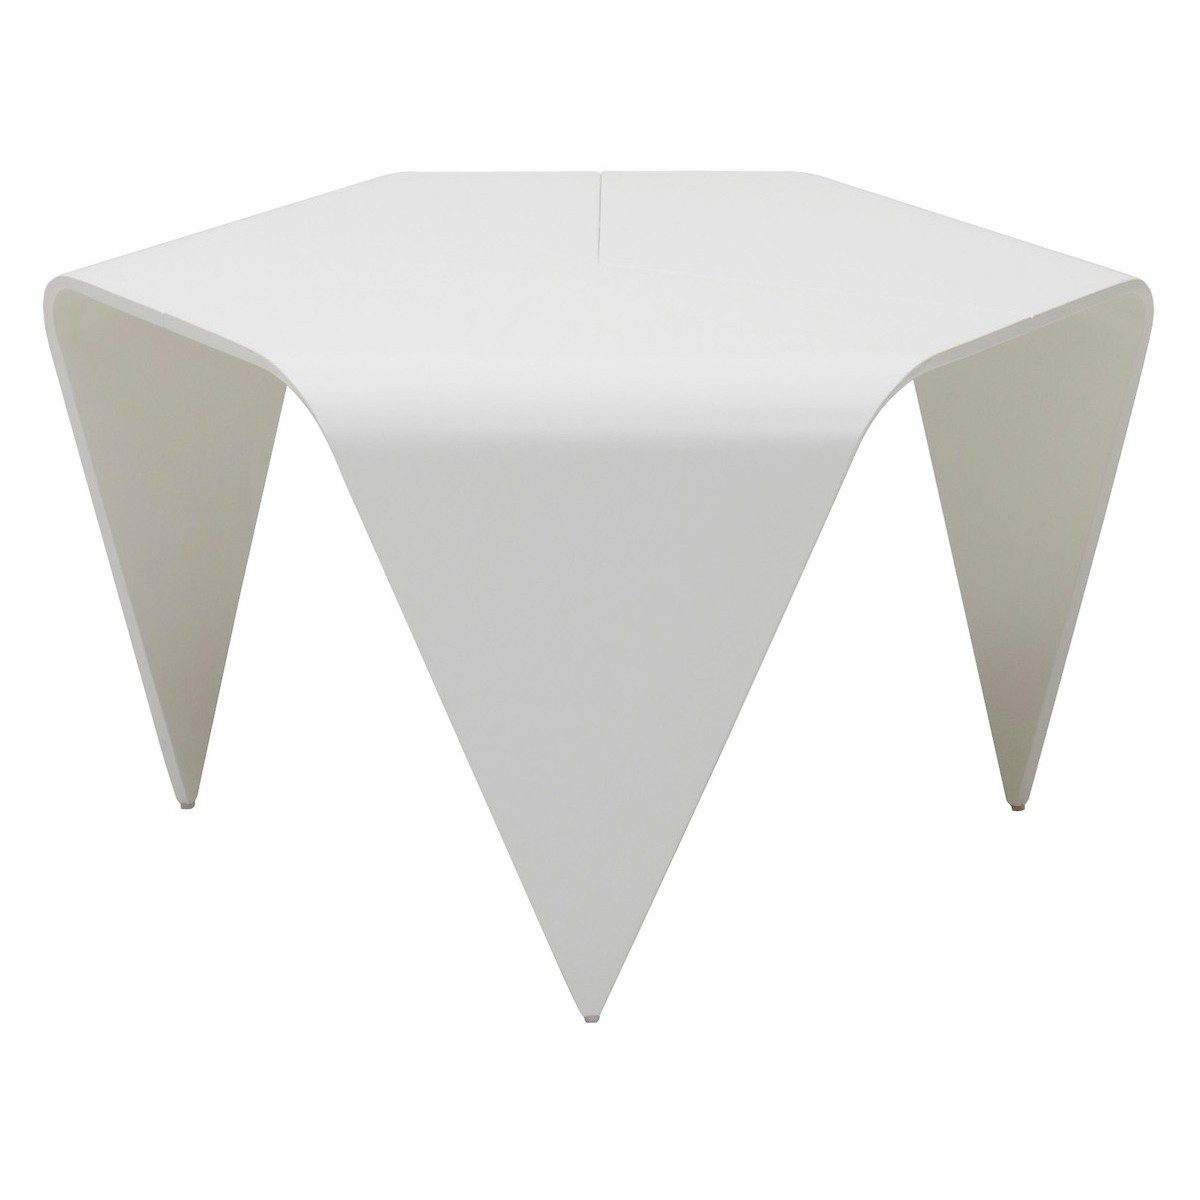 white - Trienna side table